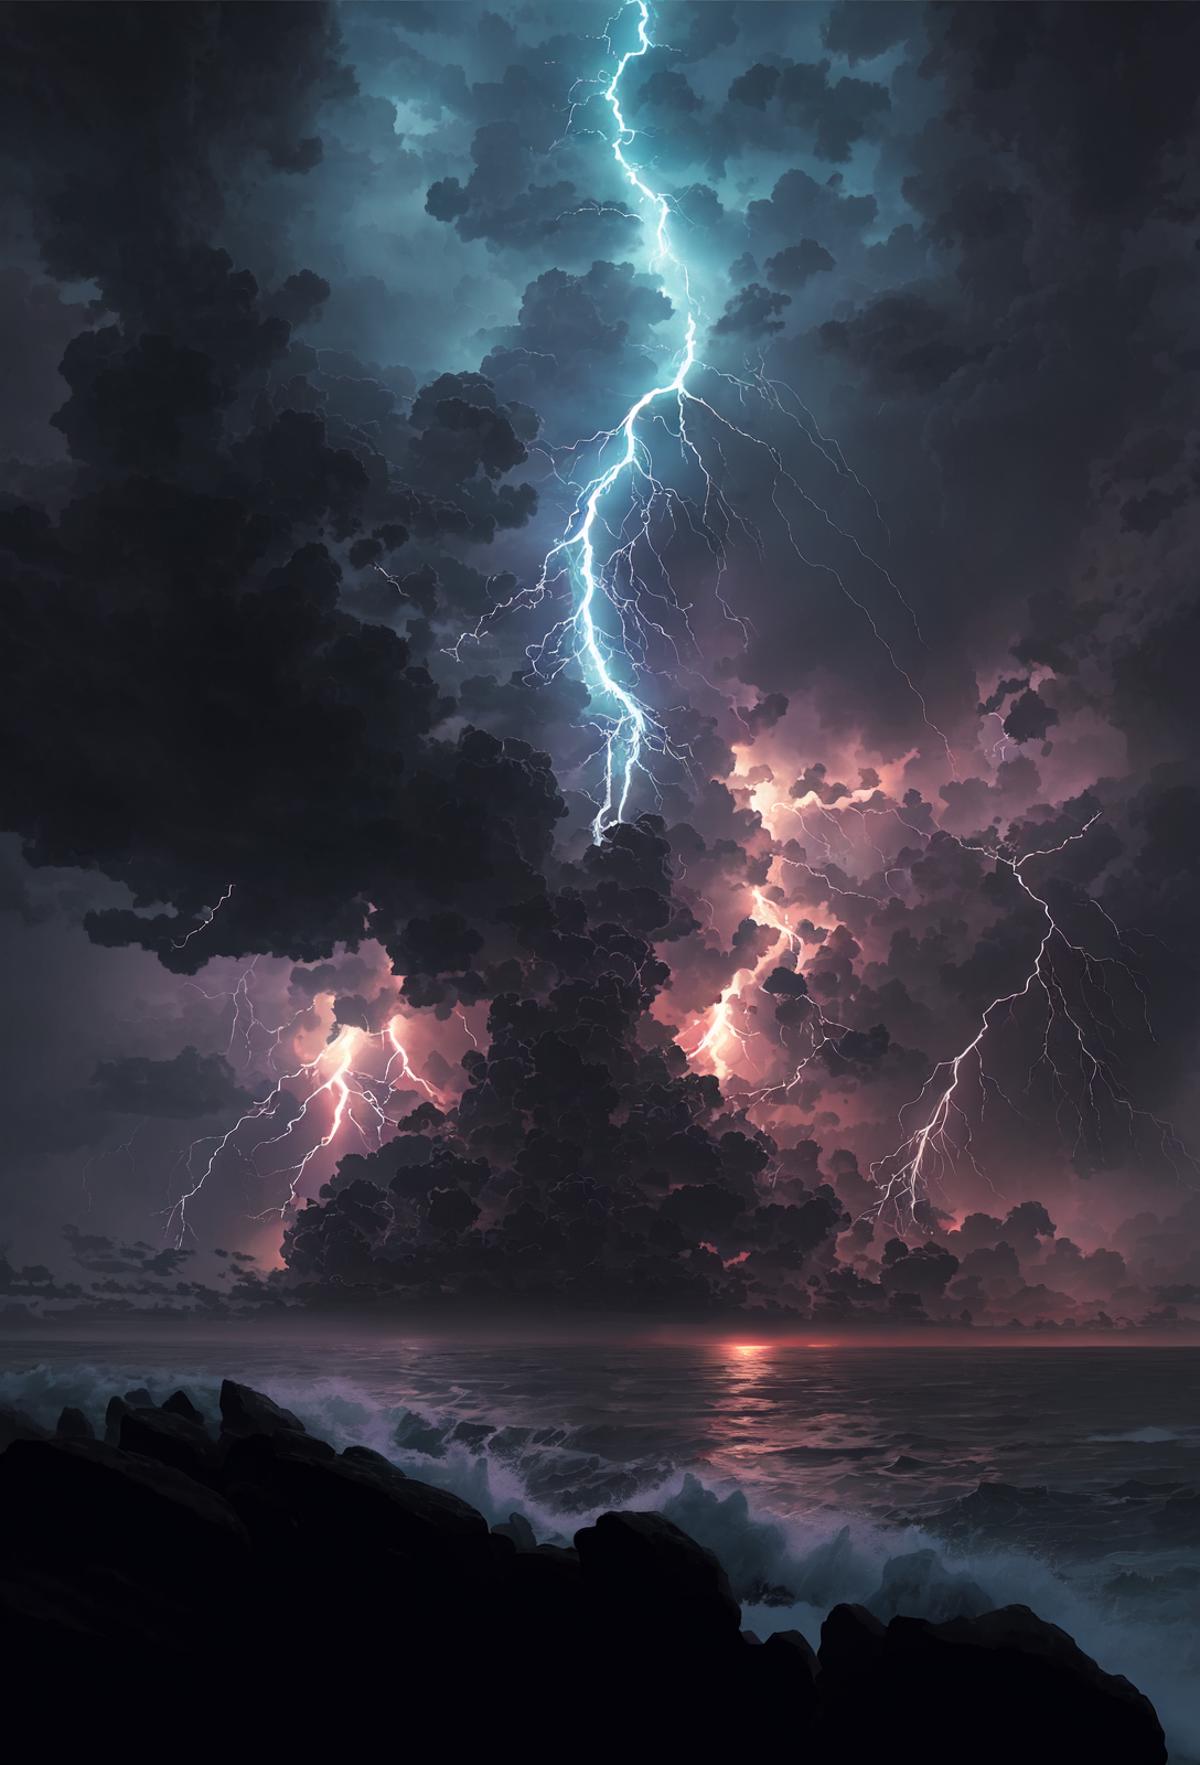 A dramatic and powerful storm, with lightning illuminating the sky and rain pouring down, painting by unknown